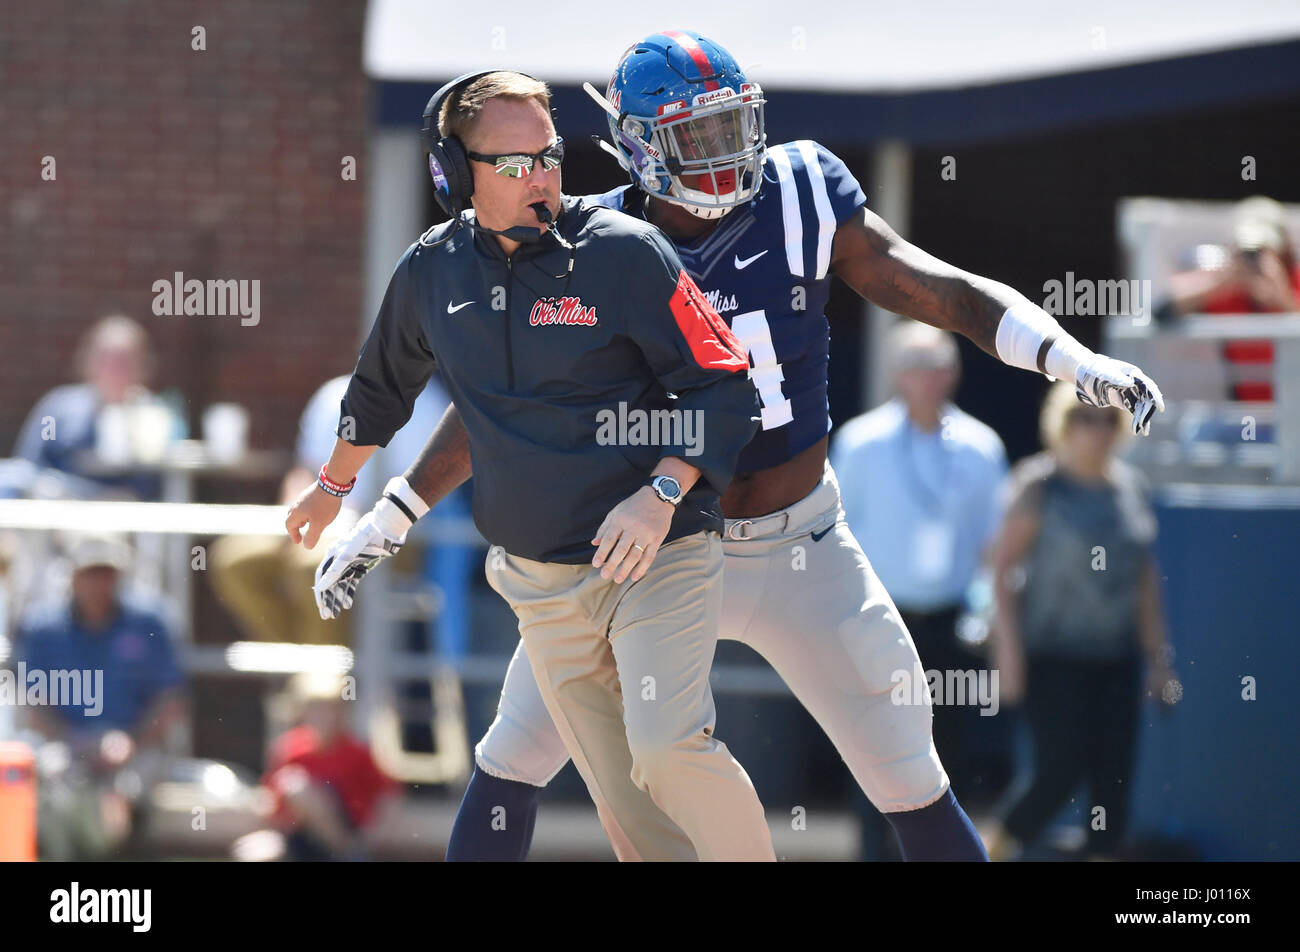 Oxford, MS, USA. 8th Apr, 2017. Mississippi defensive end Victor Evans (right) tries to keep from running into coach Hugh Freeze (left) during the second quarter of an NCAA college football spring game at Vaught-Hemmingway Stadium in Oxford, MS. The Red team won 31-29. Austin McAfee/CSM/Alamy Live News Stock Photo